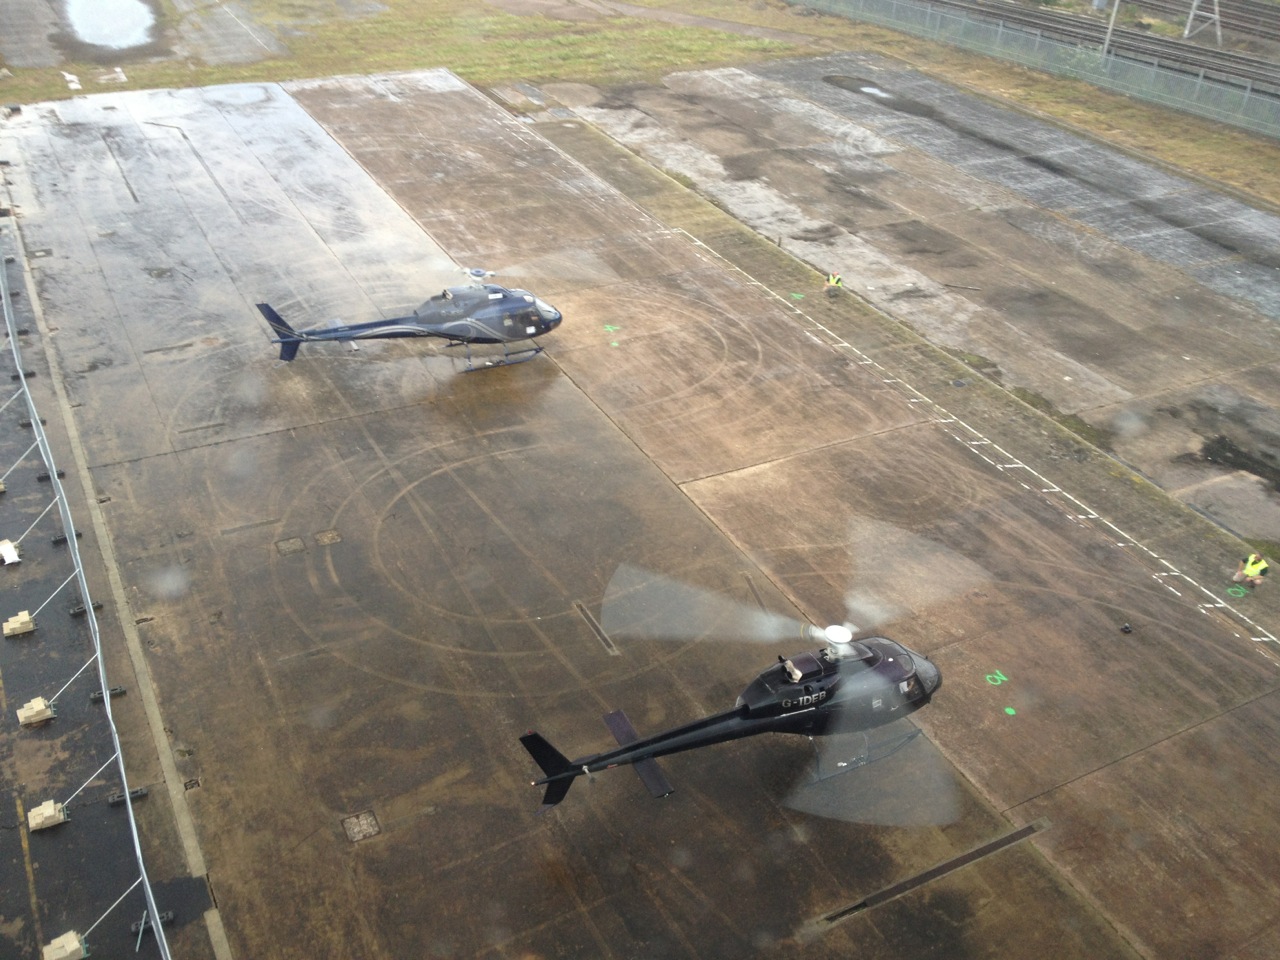 Two helicopters on a landing strip.